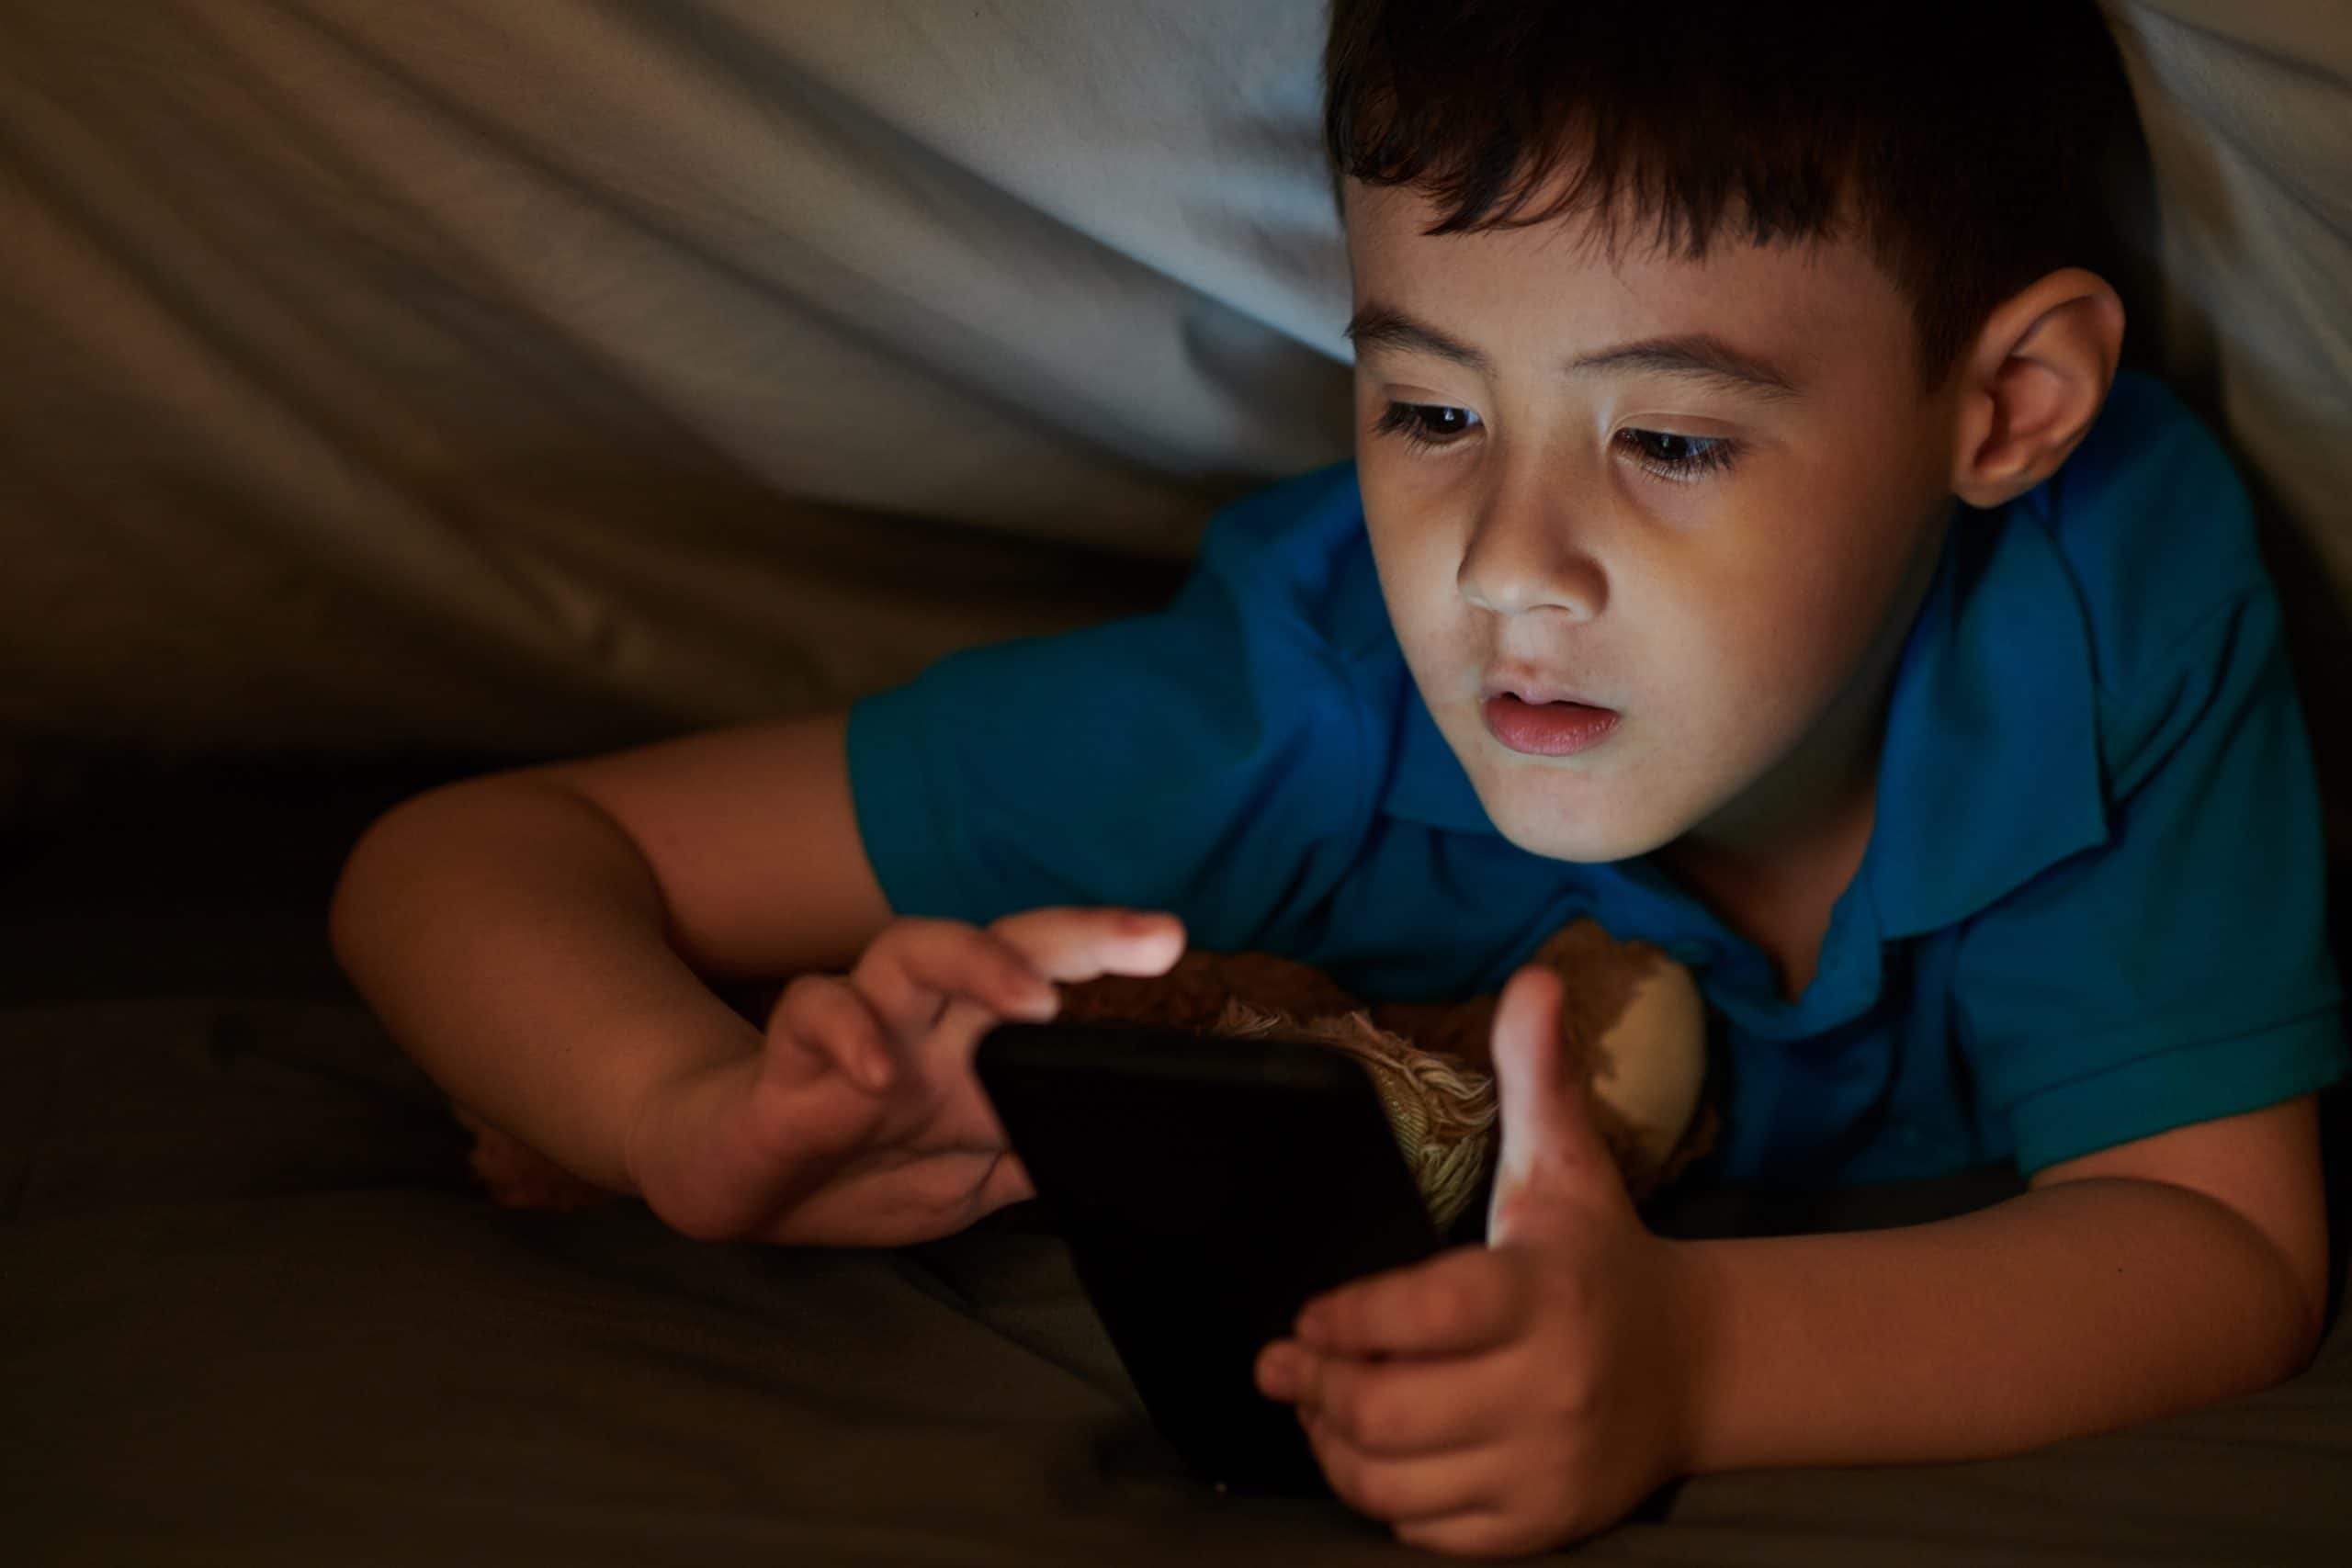 Child watches video on phone